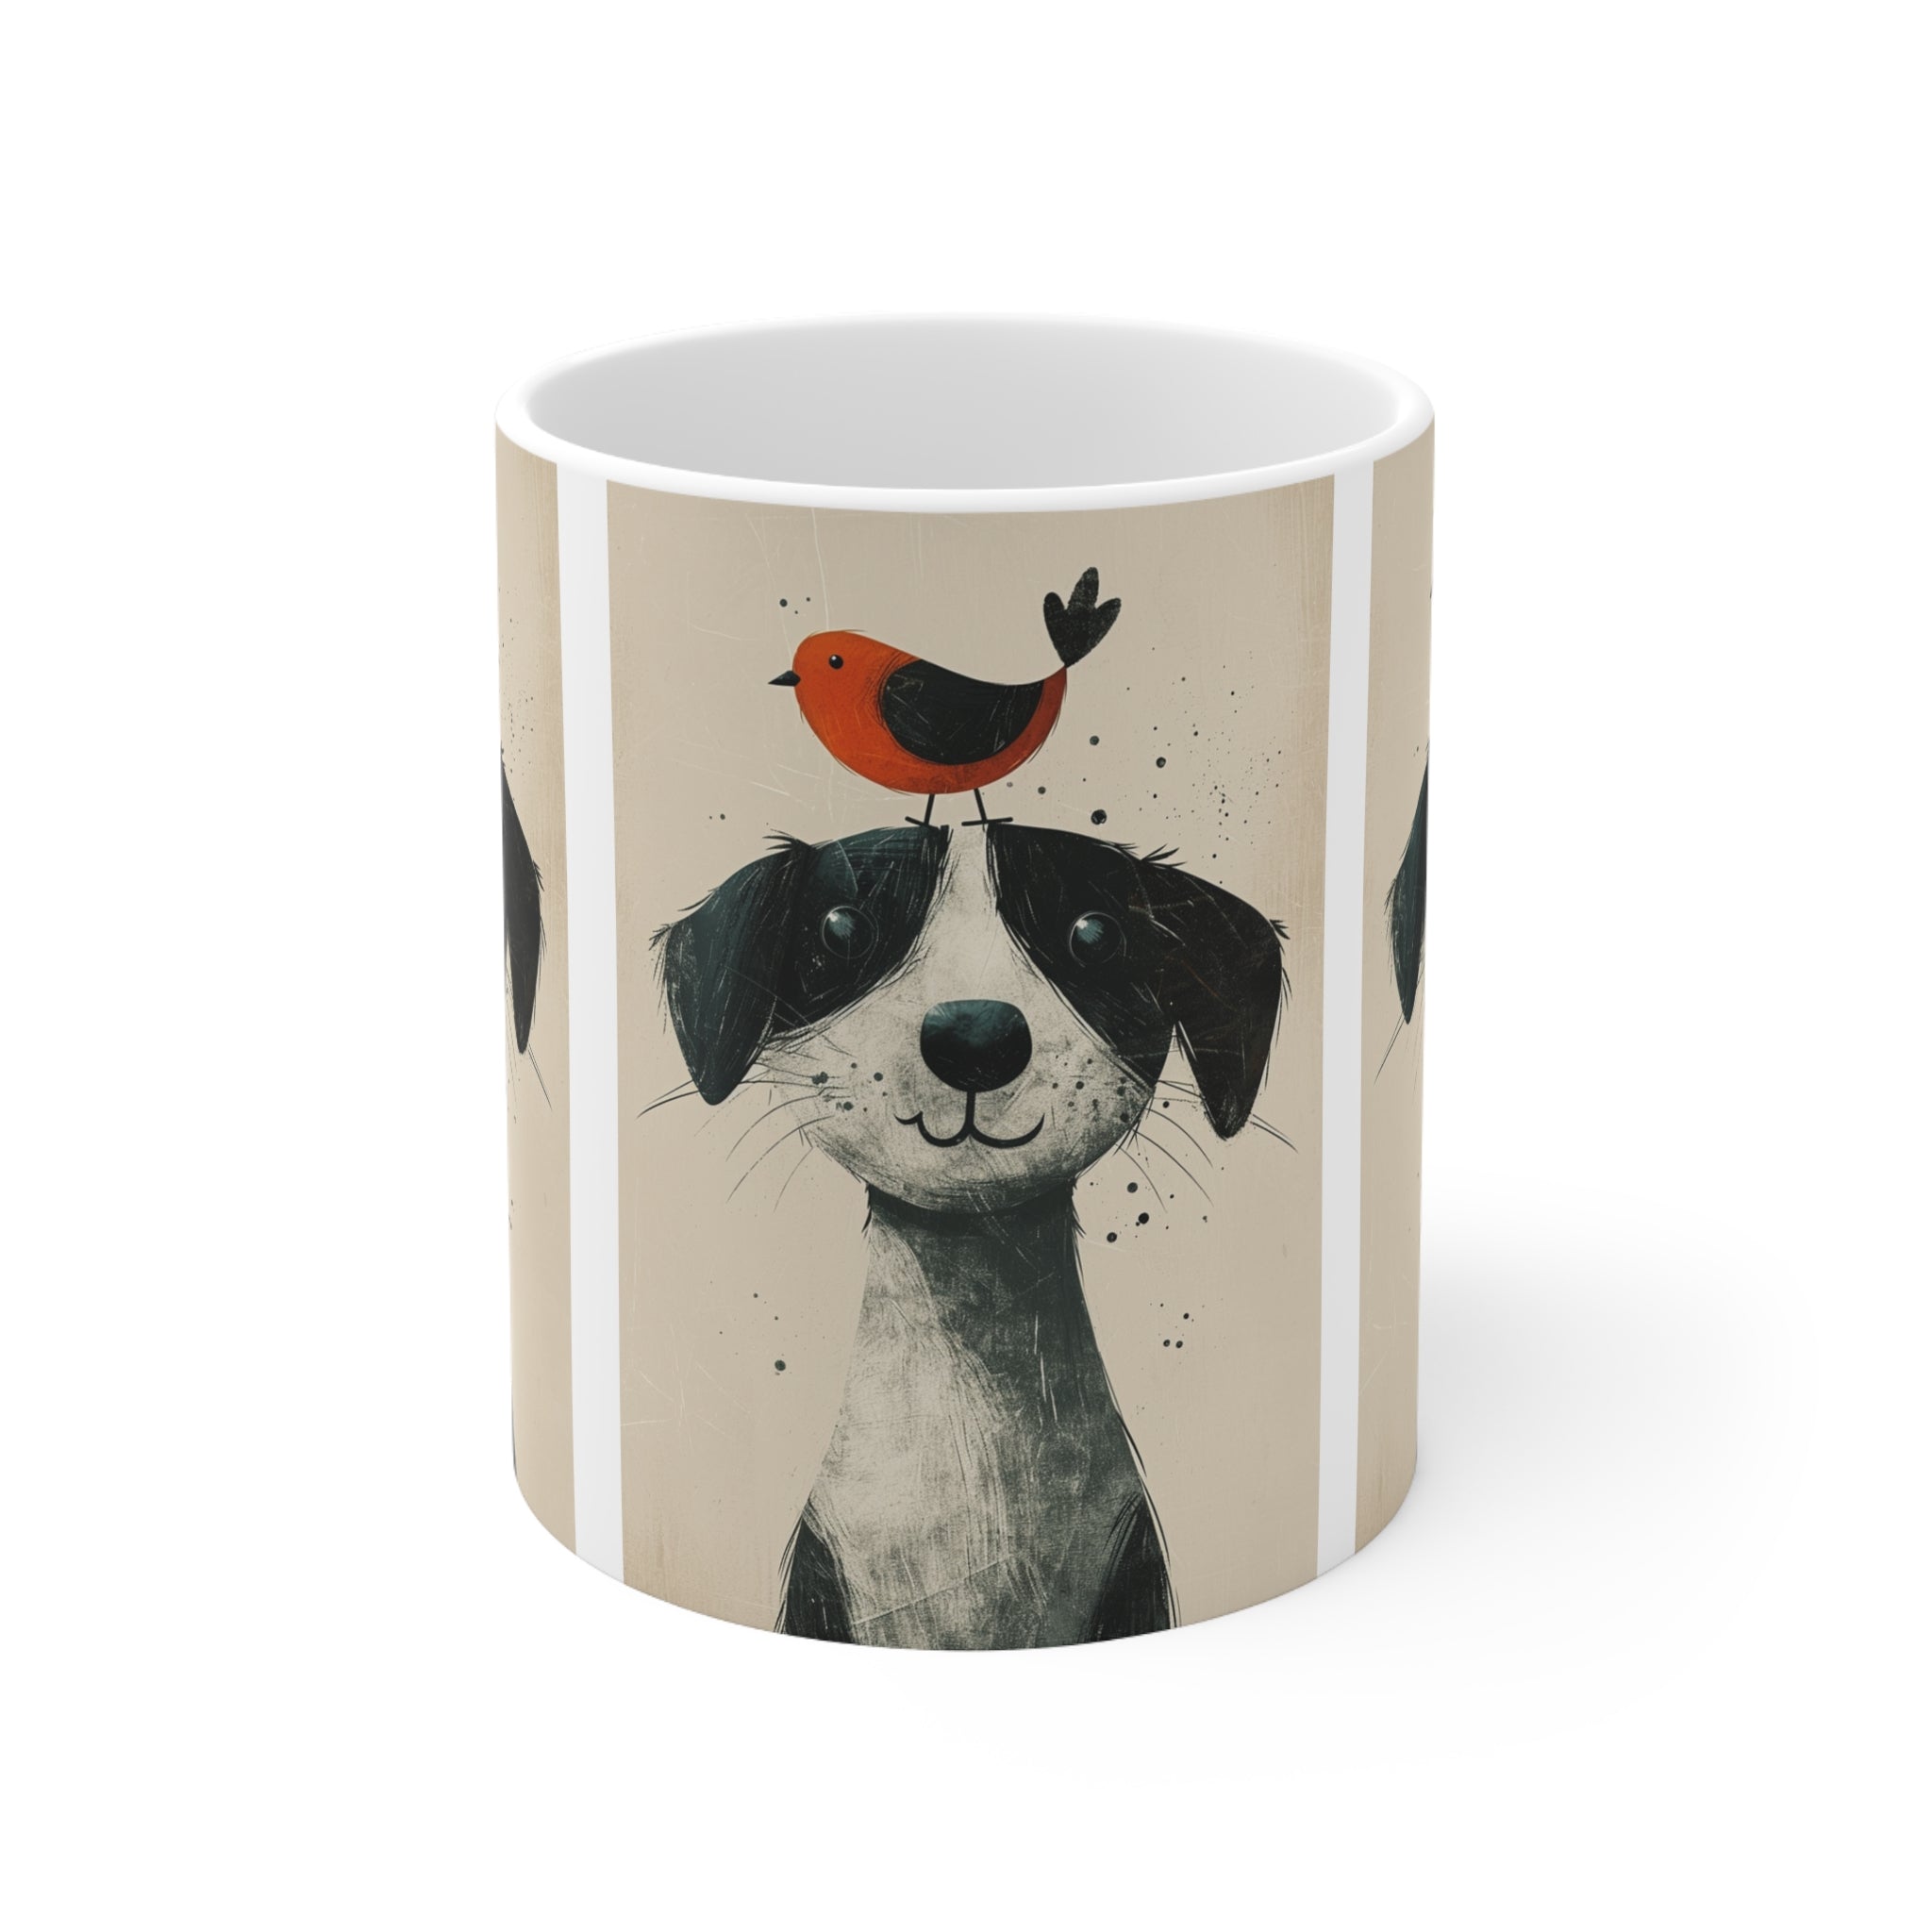 Coffee Drinkers and Dog Lovers Happy Dog with Friendly Birddie Ceramic Mug 11oz - Cute Animal Friendship Coffee Cup for Relaxing Mornings and Tea Afternoon Bliss